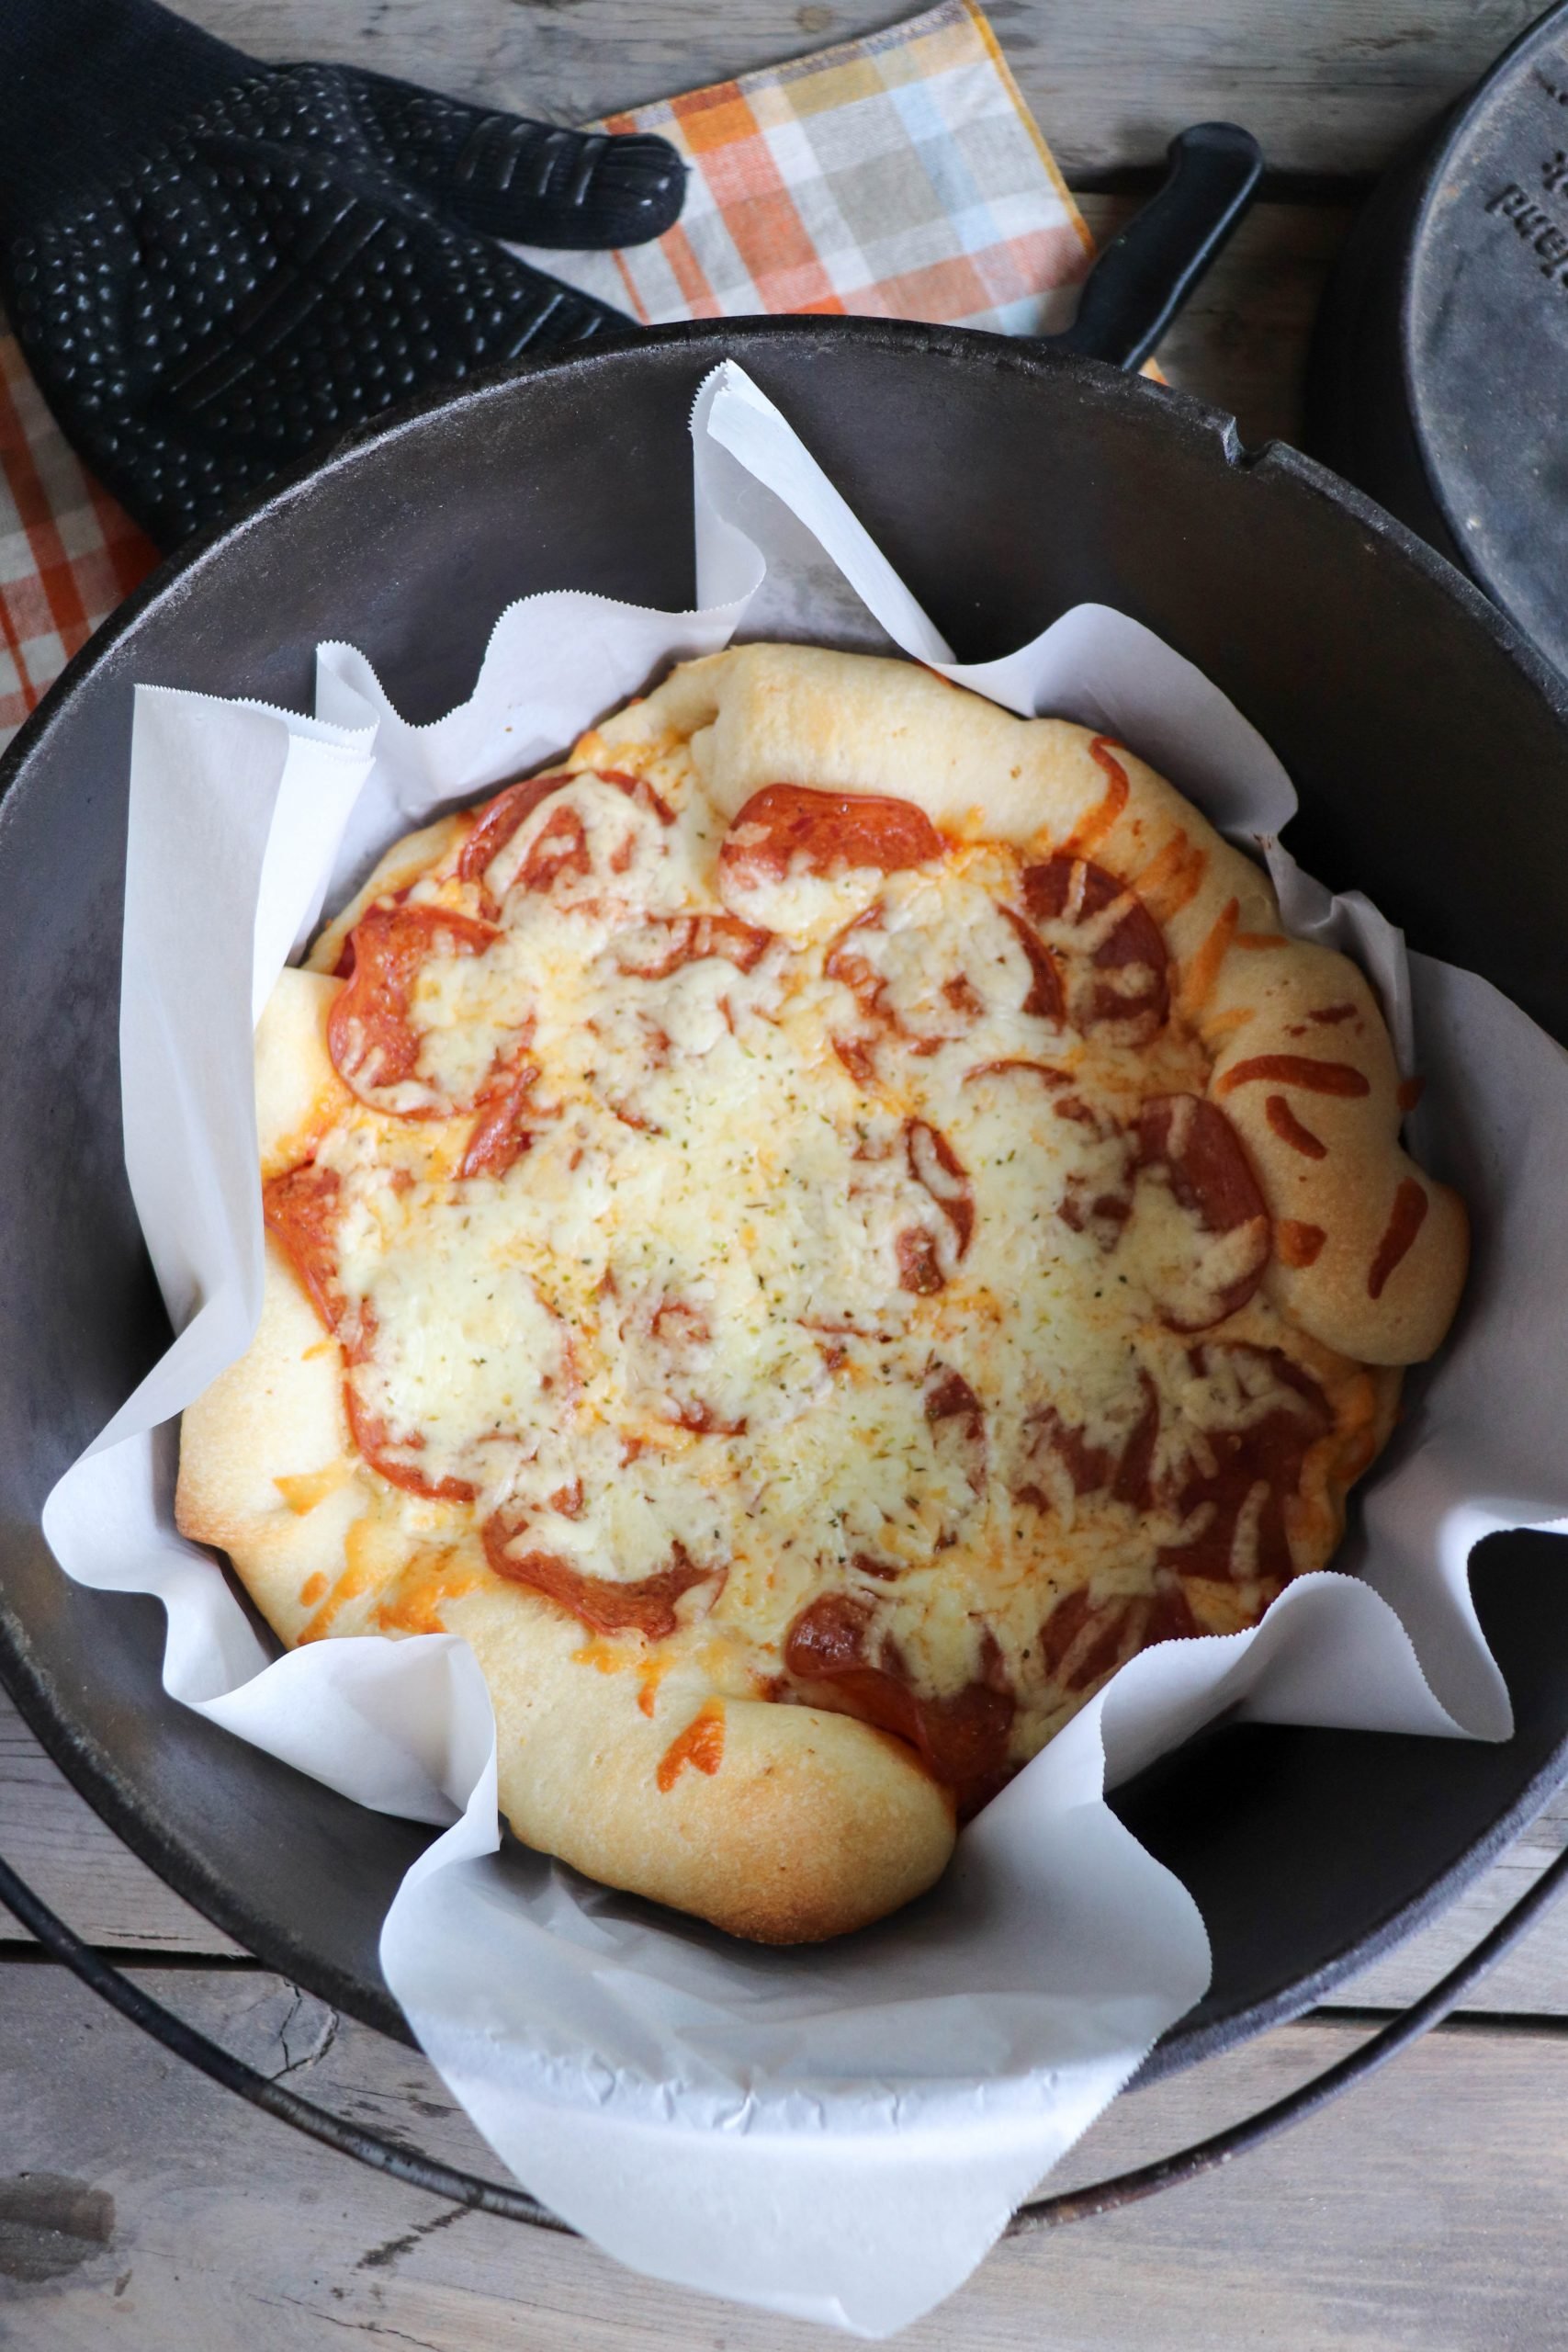 https://campfirefoodie.com/wp-content/uploads/2021/05/Dutch-Oven-Pizza-Recipe-11-scaled.jpg